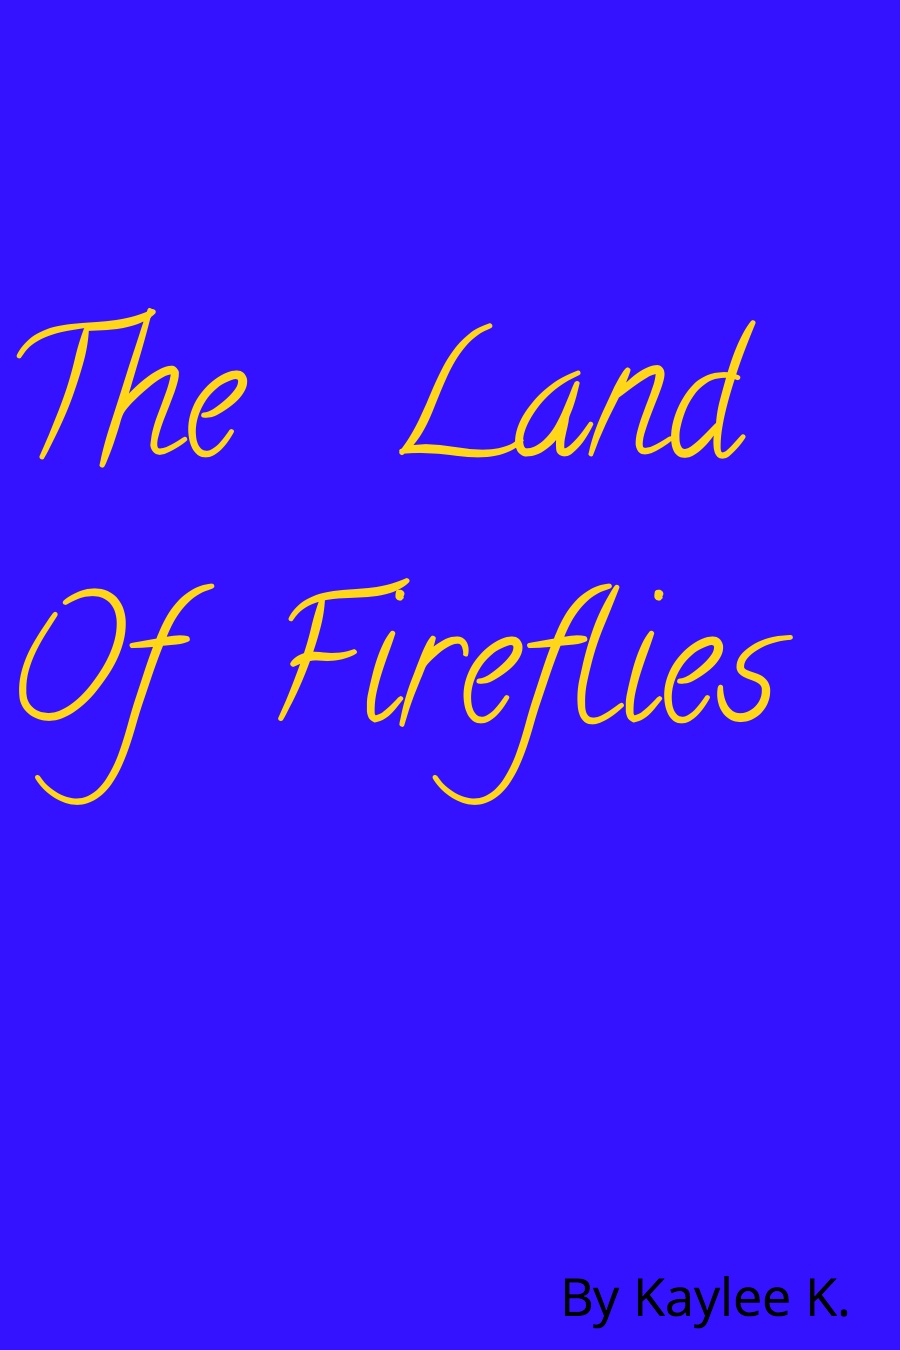 The Land Of Fireflies by Kaylee K